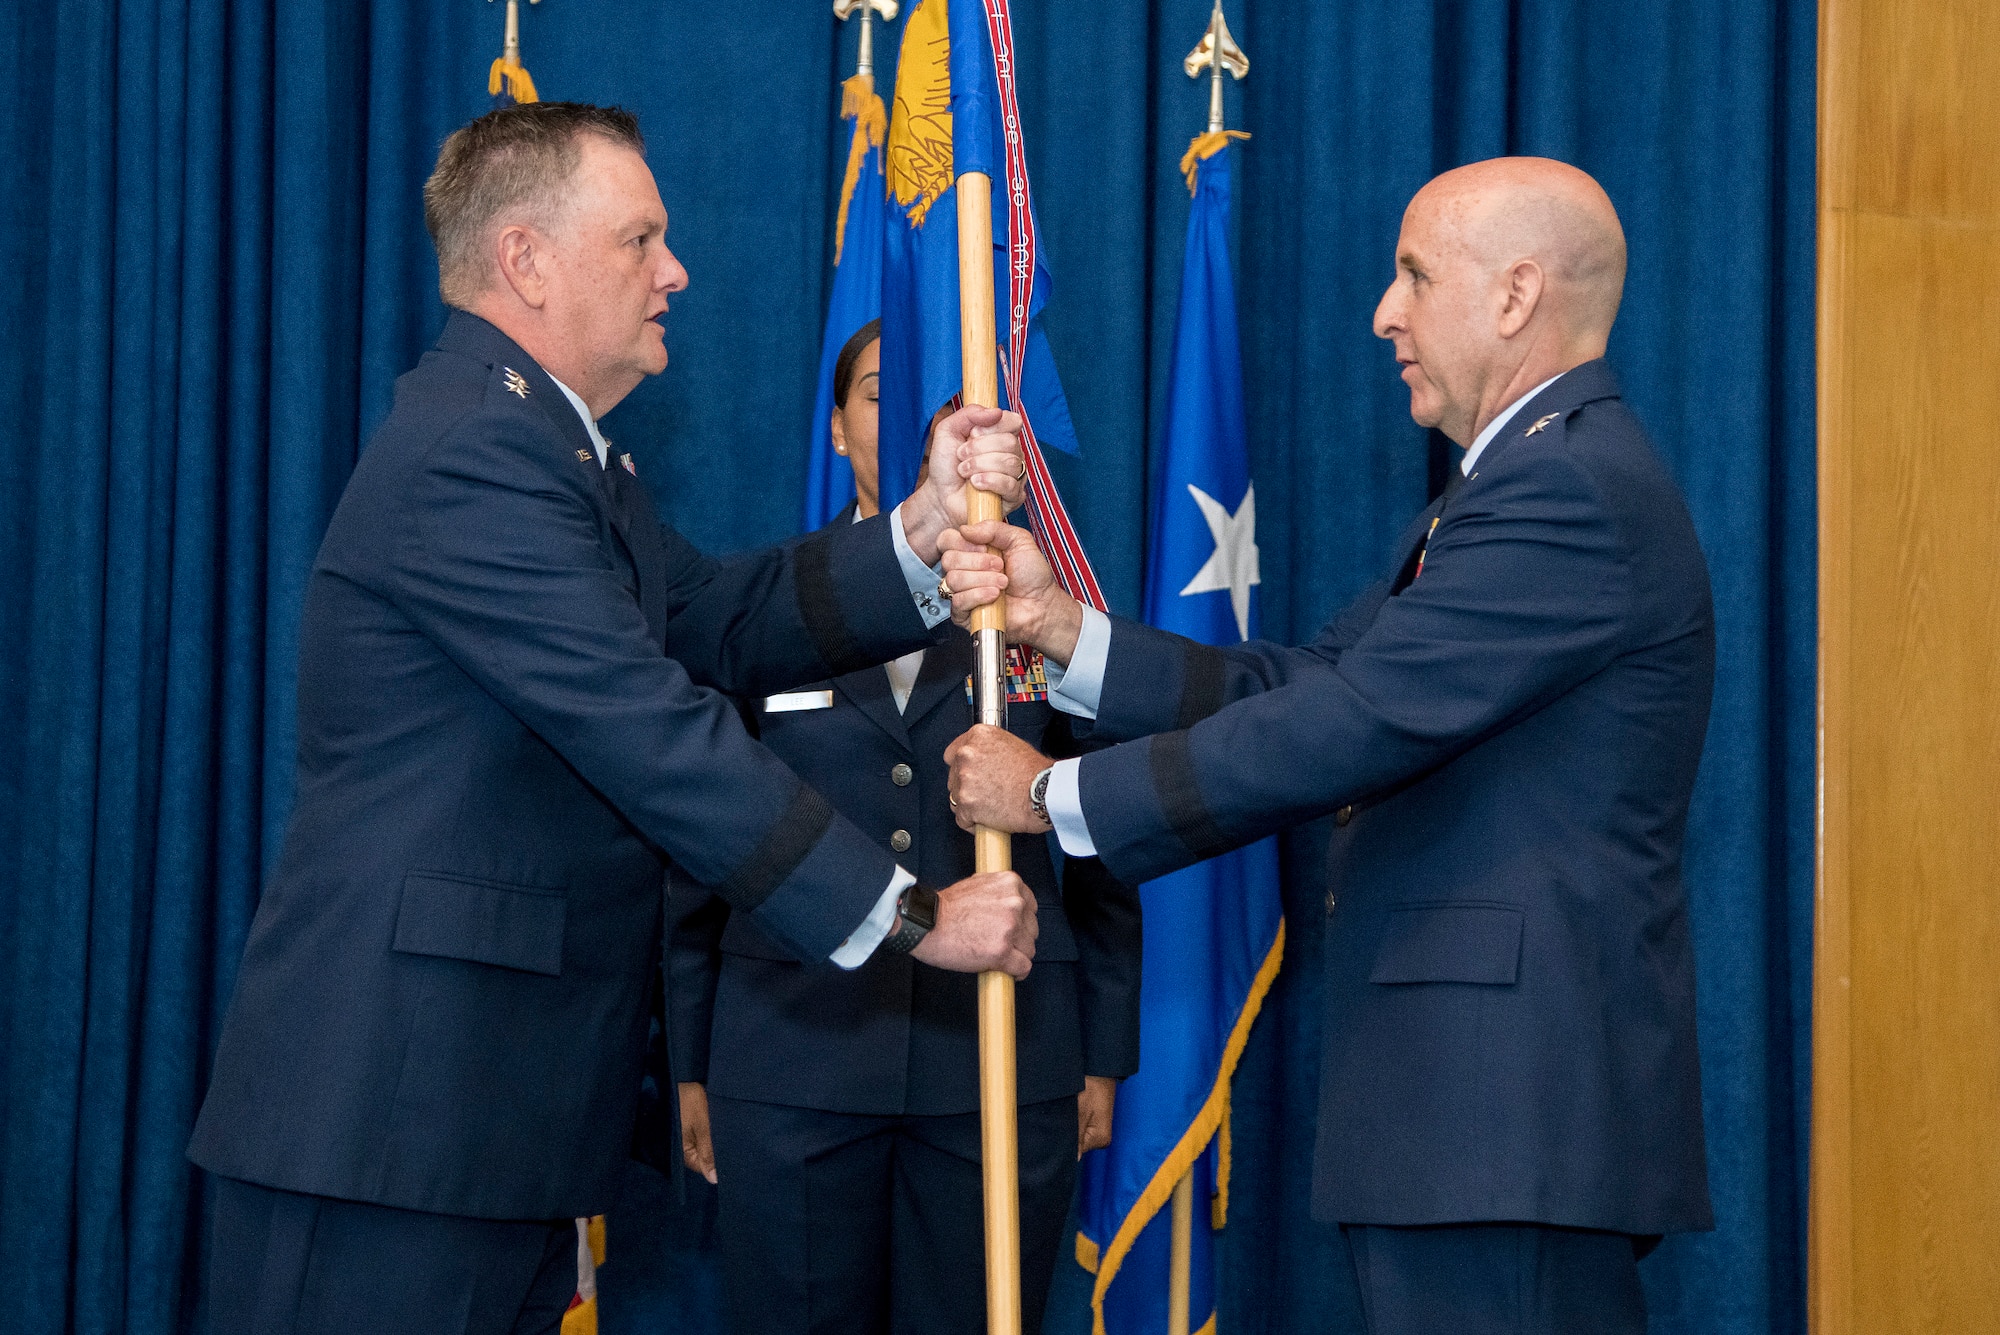 Maj. Gen. Edward Thomas, Jr., takes command of Air Force Recruiting Service from Lt. Gen. Marshall "Brad" Webb, commander, Air Education and Training Command in a ceremony at Joint Base San Antonio-Randolph, Texas,  June 11, 2020.